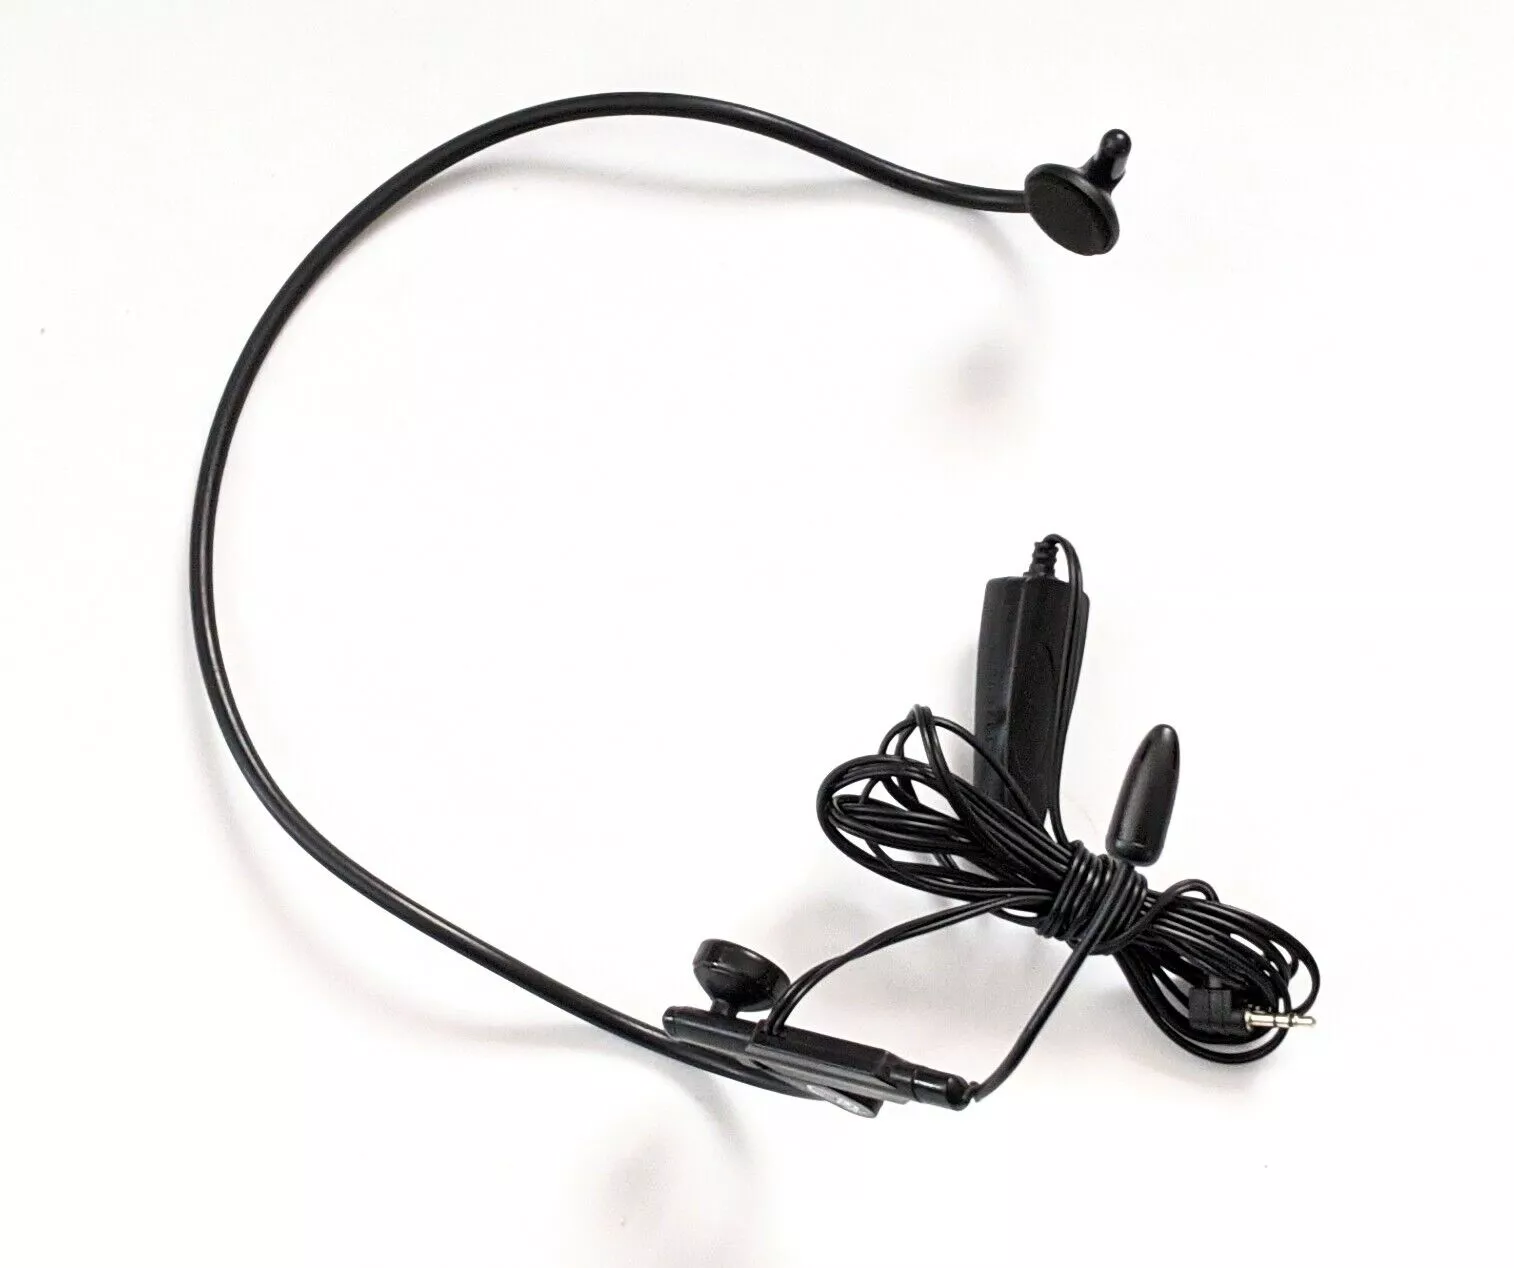 Mad Catz Nintendo DSi Chat Pak Headset with Microphone Head Set DS i XL Black (MOV523920/04)